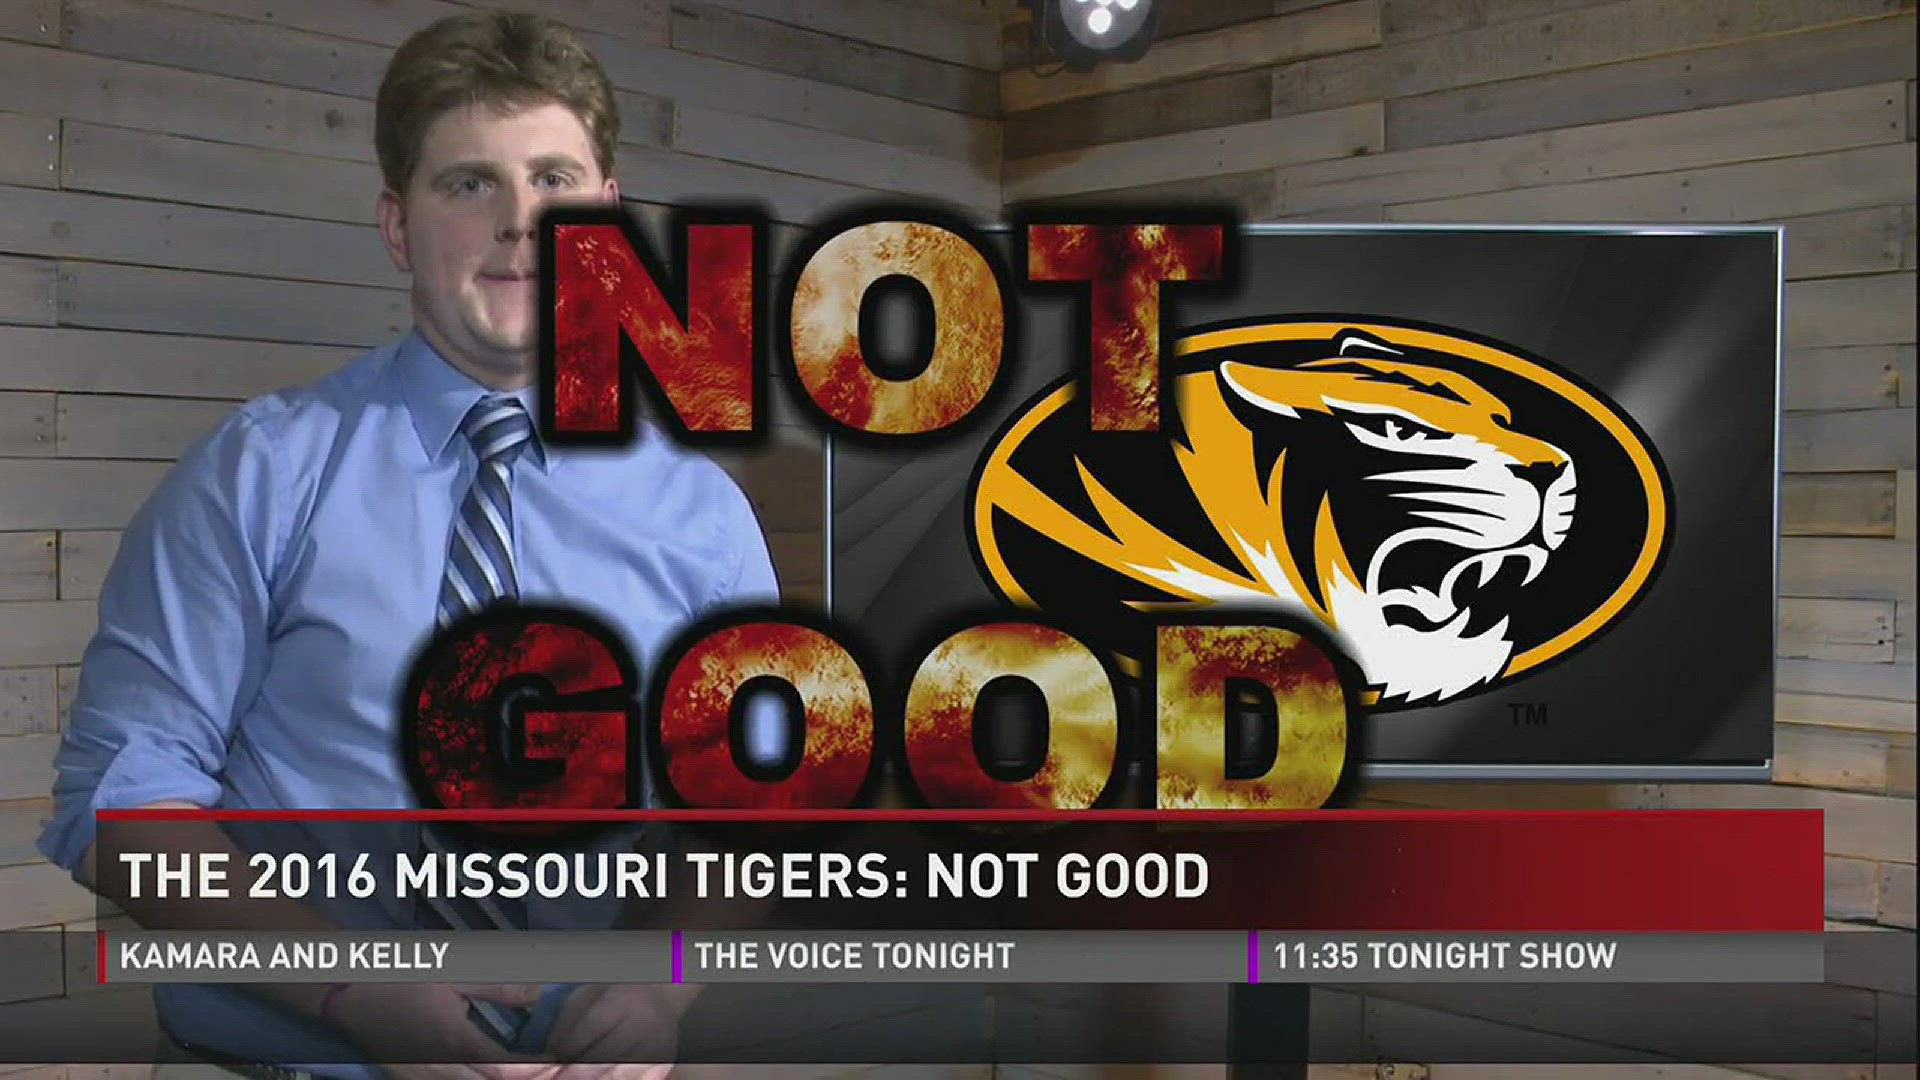 Luke Slabaugh offers his preview of the Missouri Tigers (3-7, 1-5 SEC). They're not good.